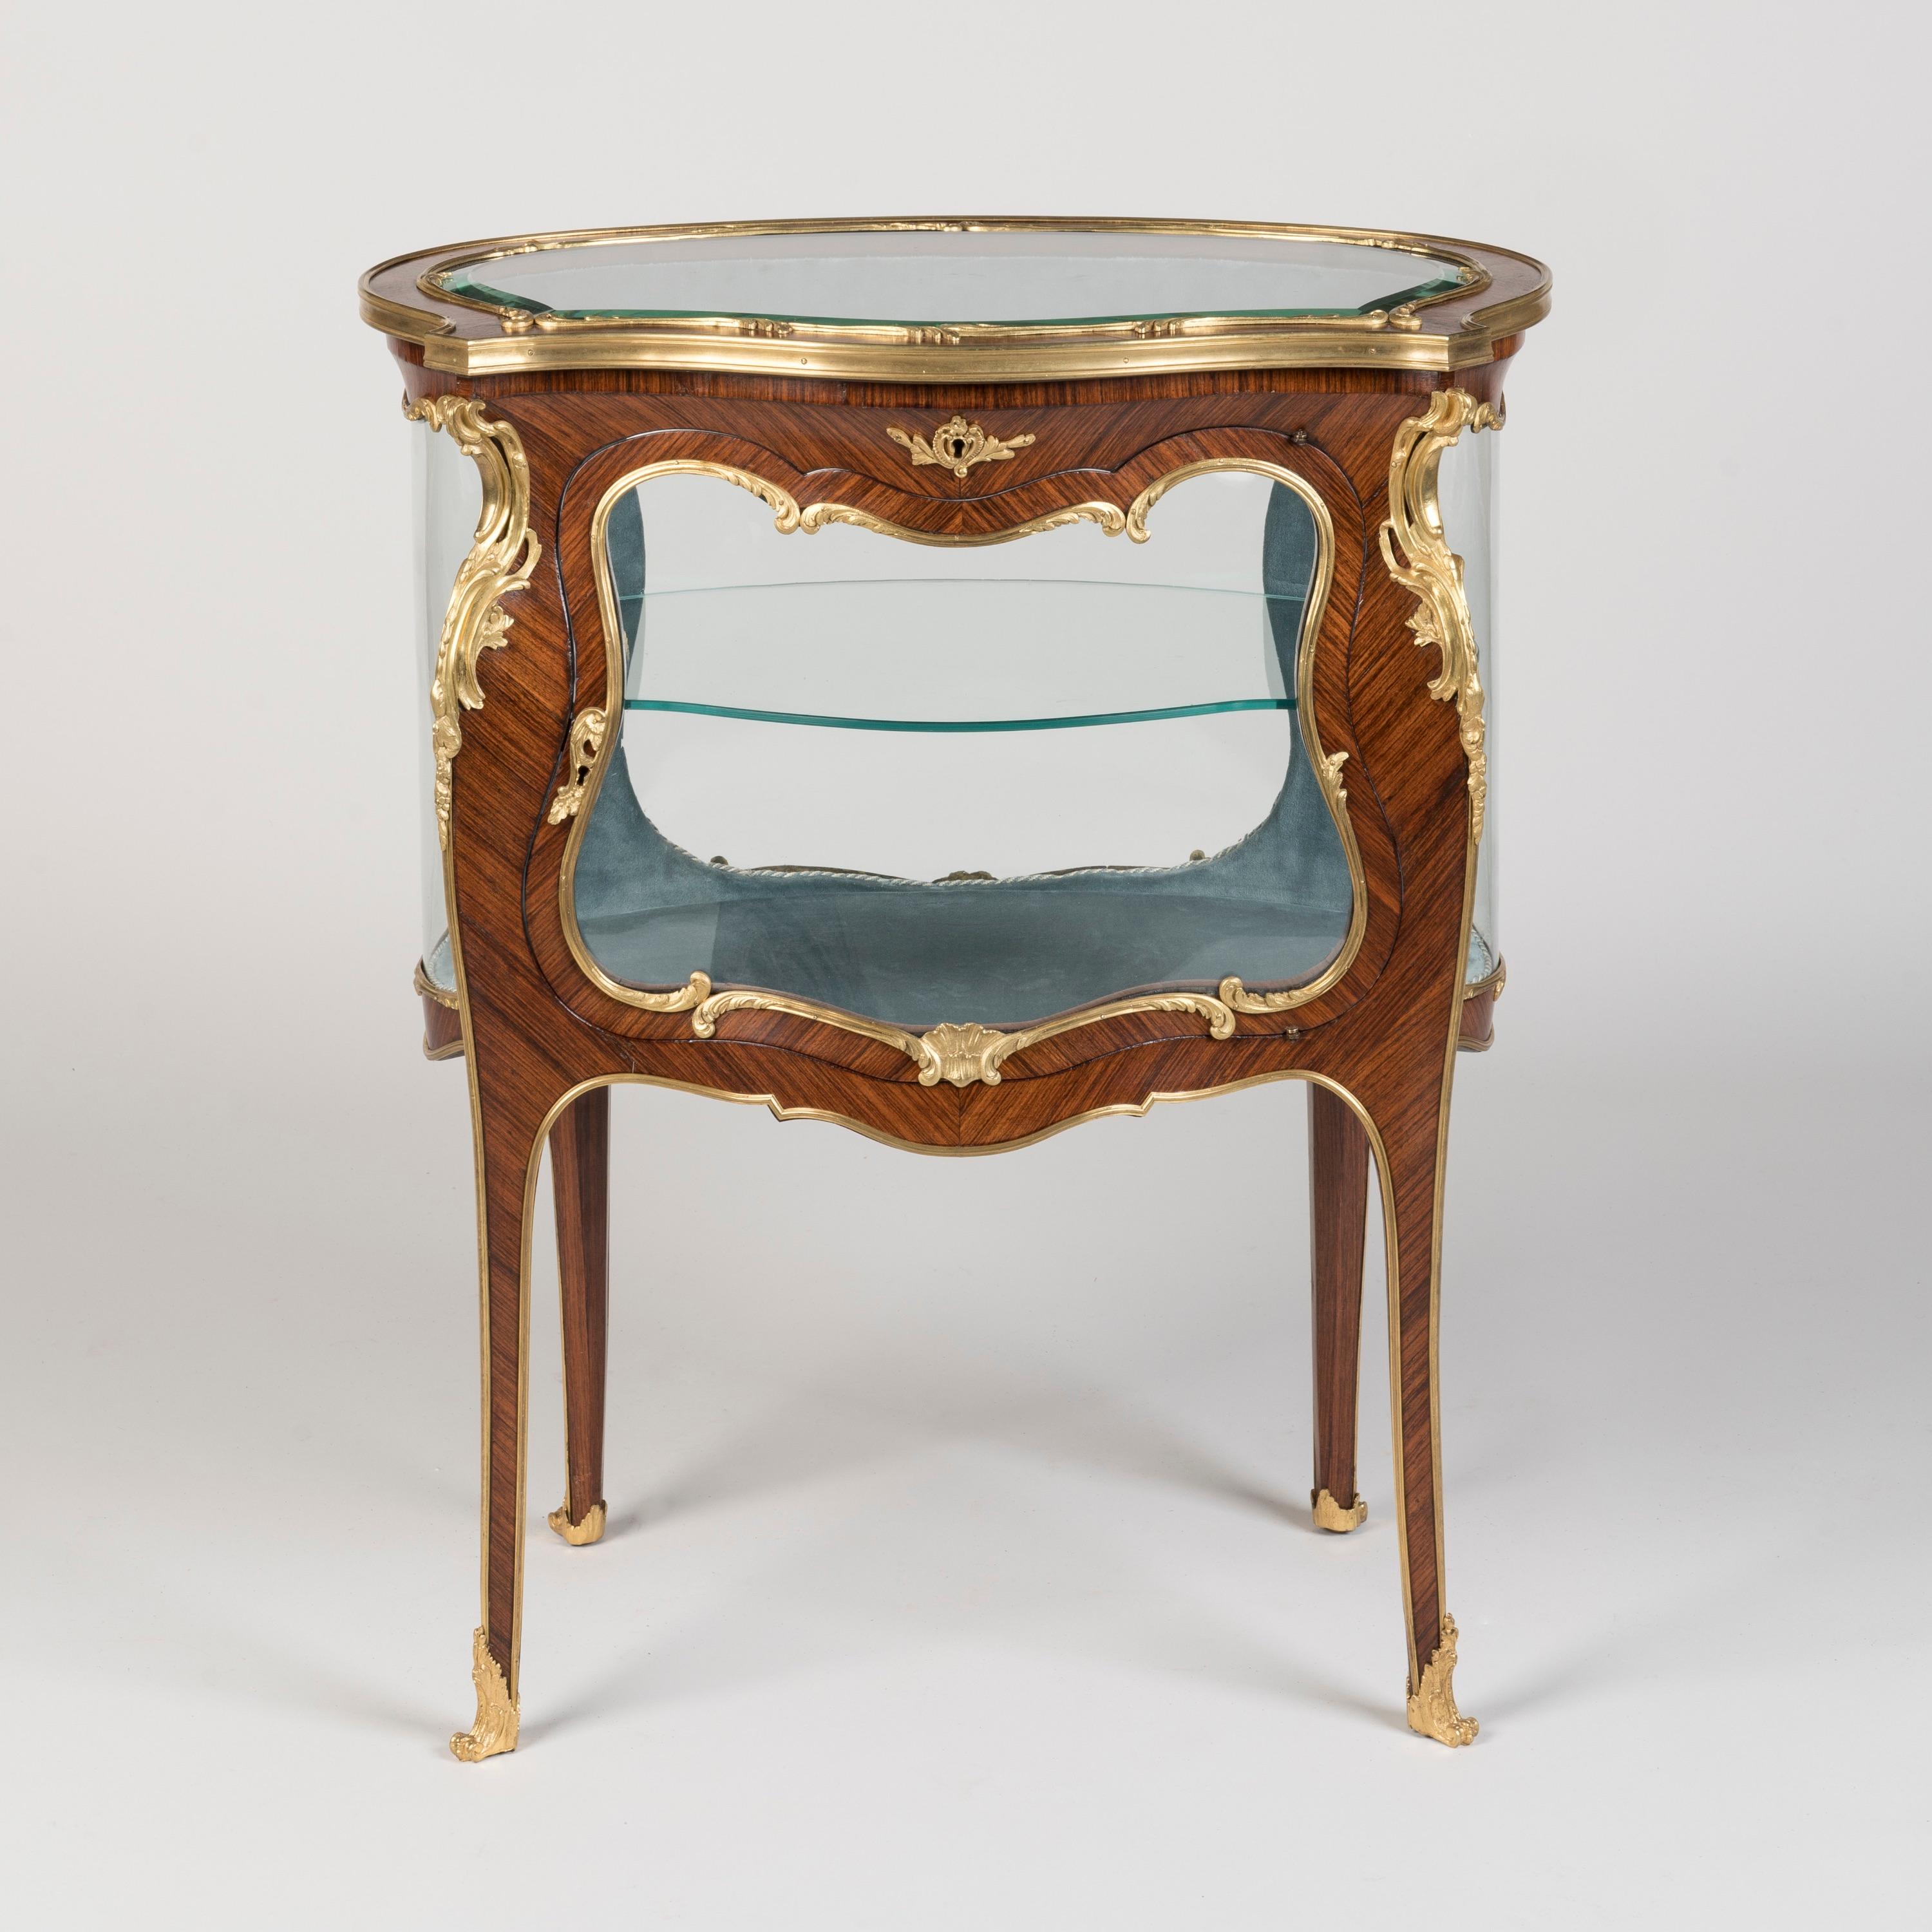 A French Bijouterie
In the manner of François Linke

Designed in the Louis XV style and constructed in a wonderfully marked Kingwood, with precise and crisply cast ormolu mounts; rising from sabot shod cabriole legs dressed with ormolu